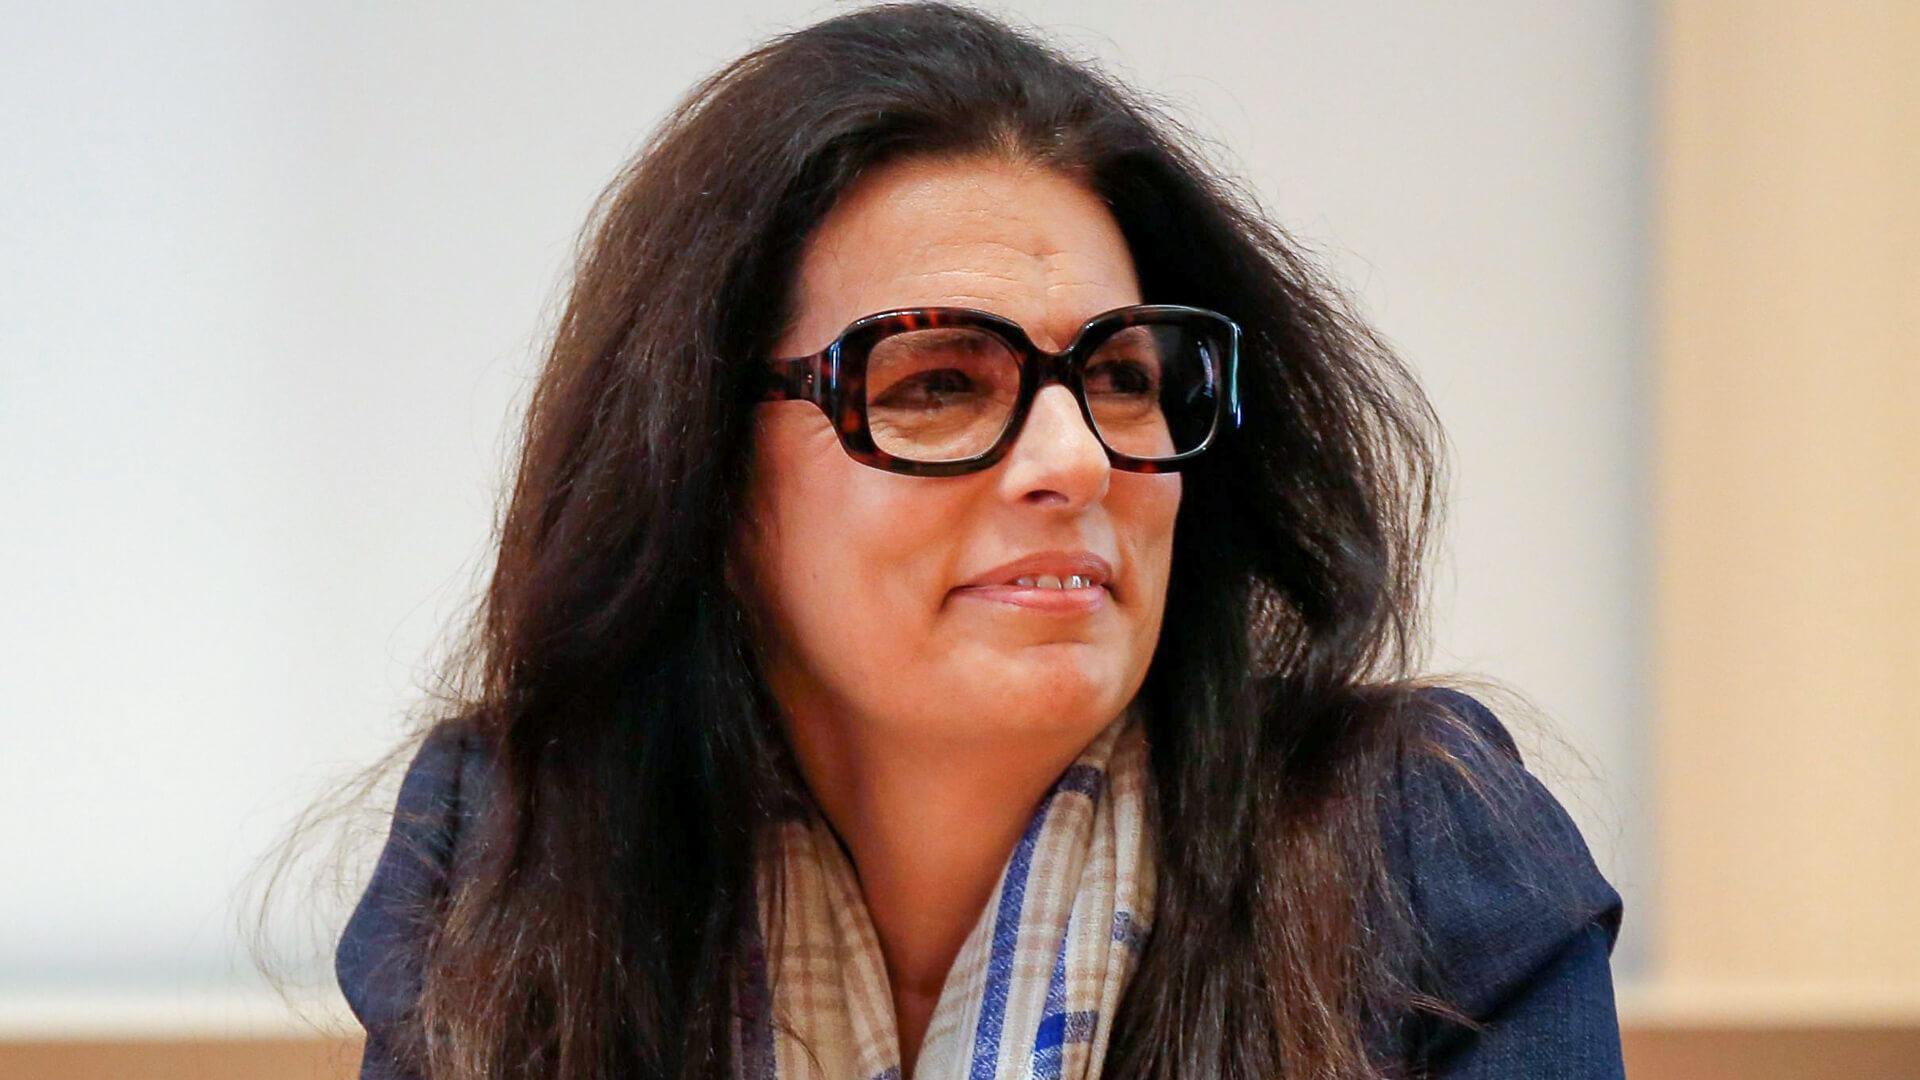 Francoise Bettencourt Meyers heiress of L'Oreal cosmetics is Richest Woman in the World